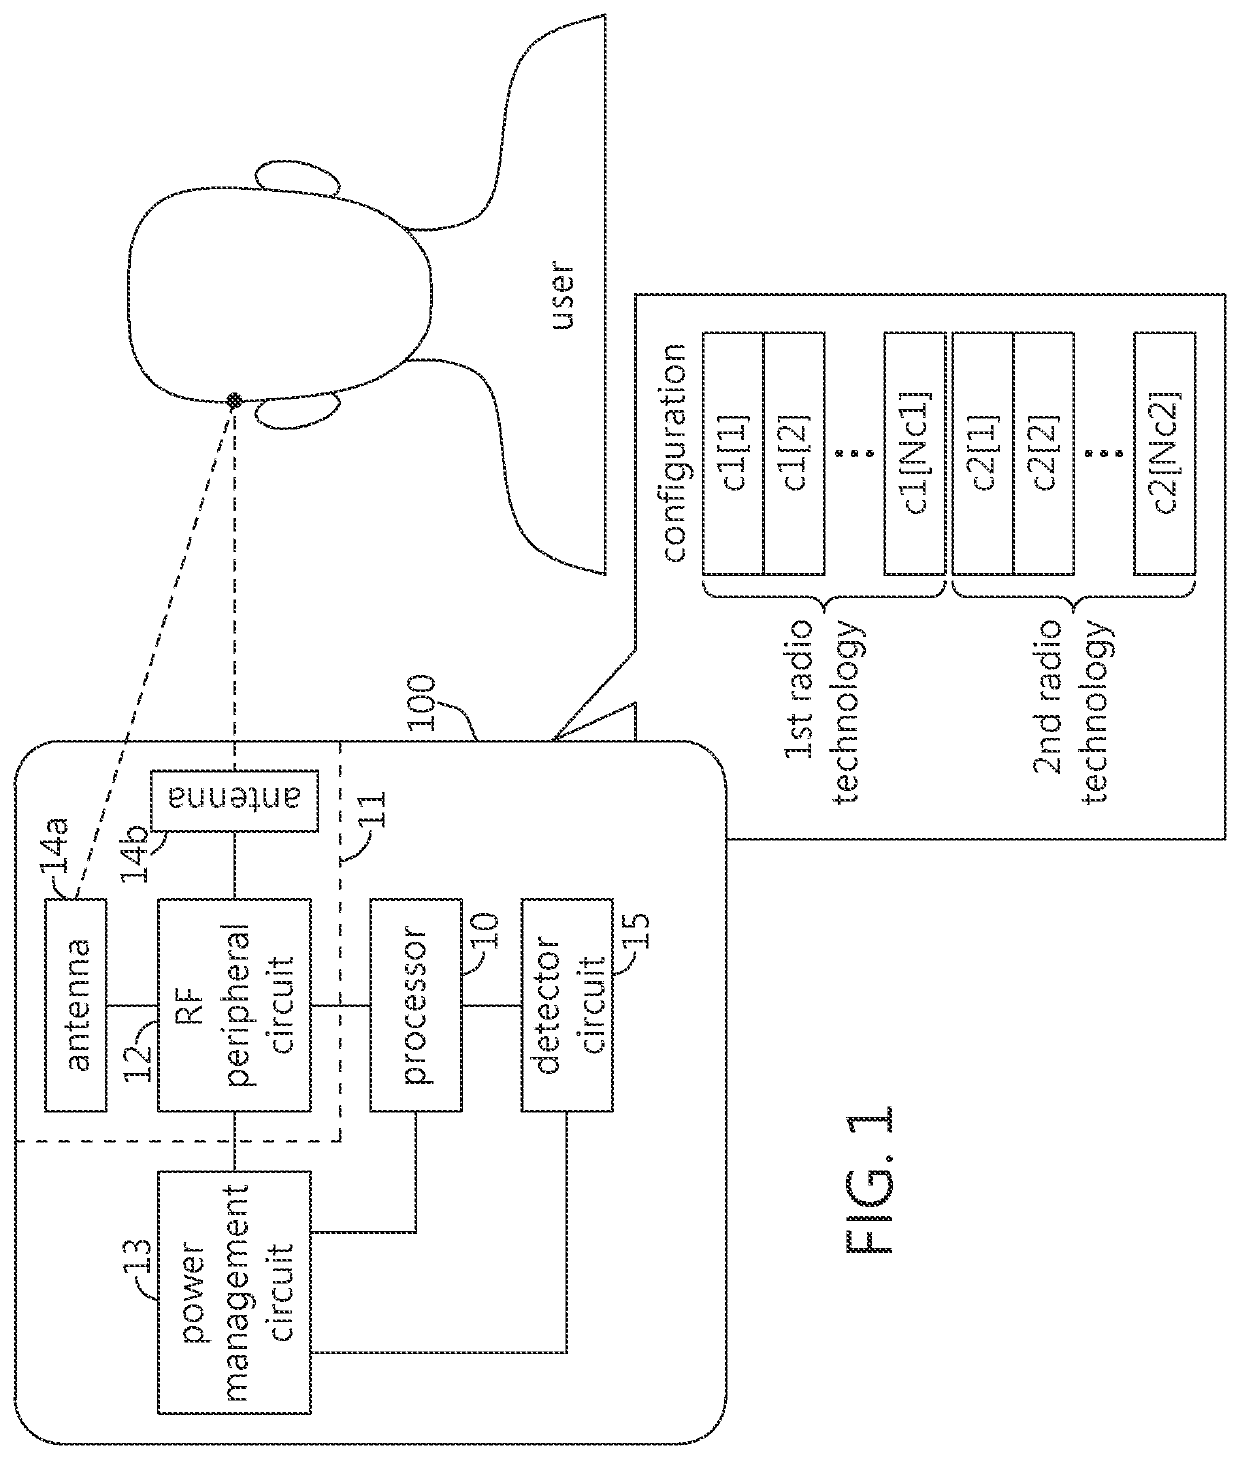 Method for improving transmission power management with compliance to regulations of radiofrequency exposure